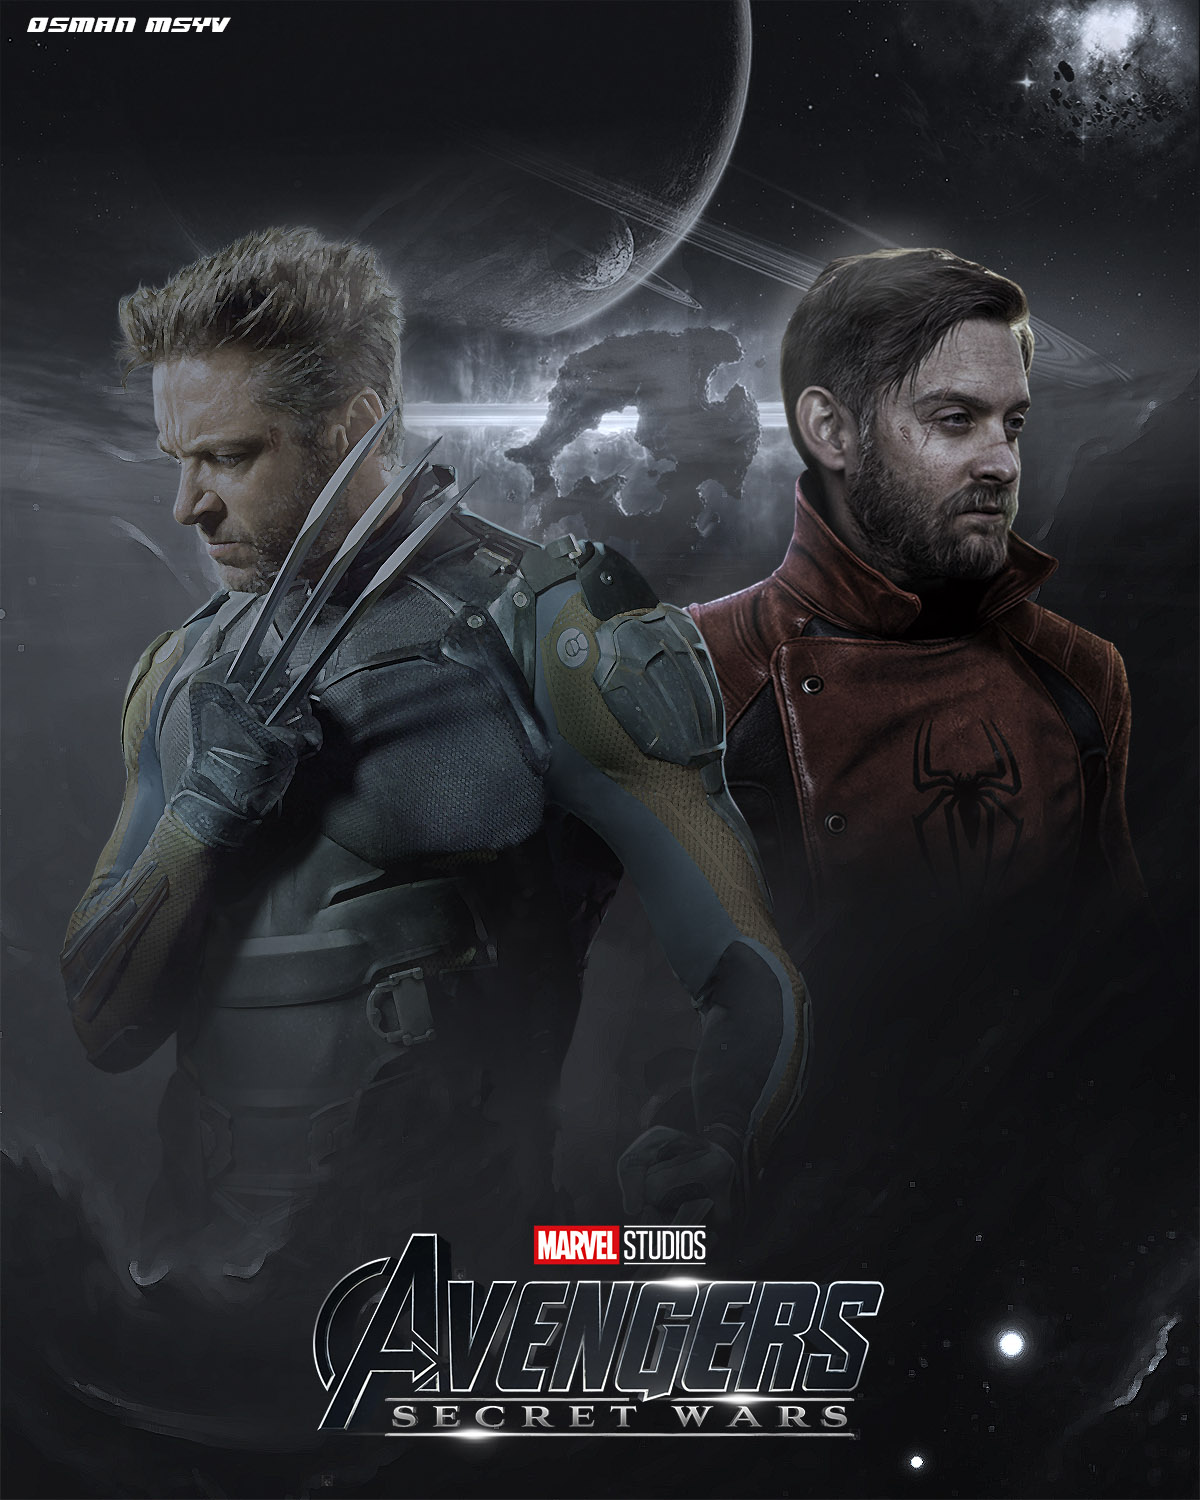 Avengers: The Kang Dynasty - Fan Poster by siefrancis on DeviantArt